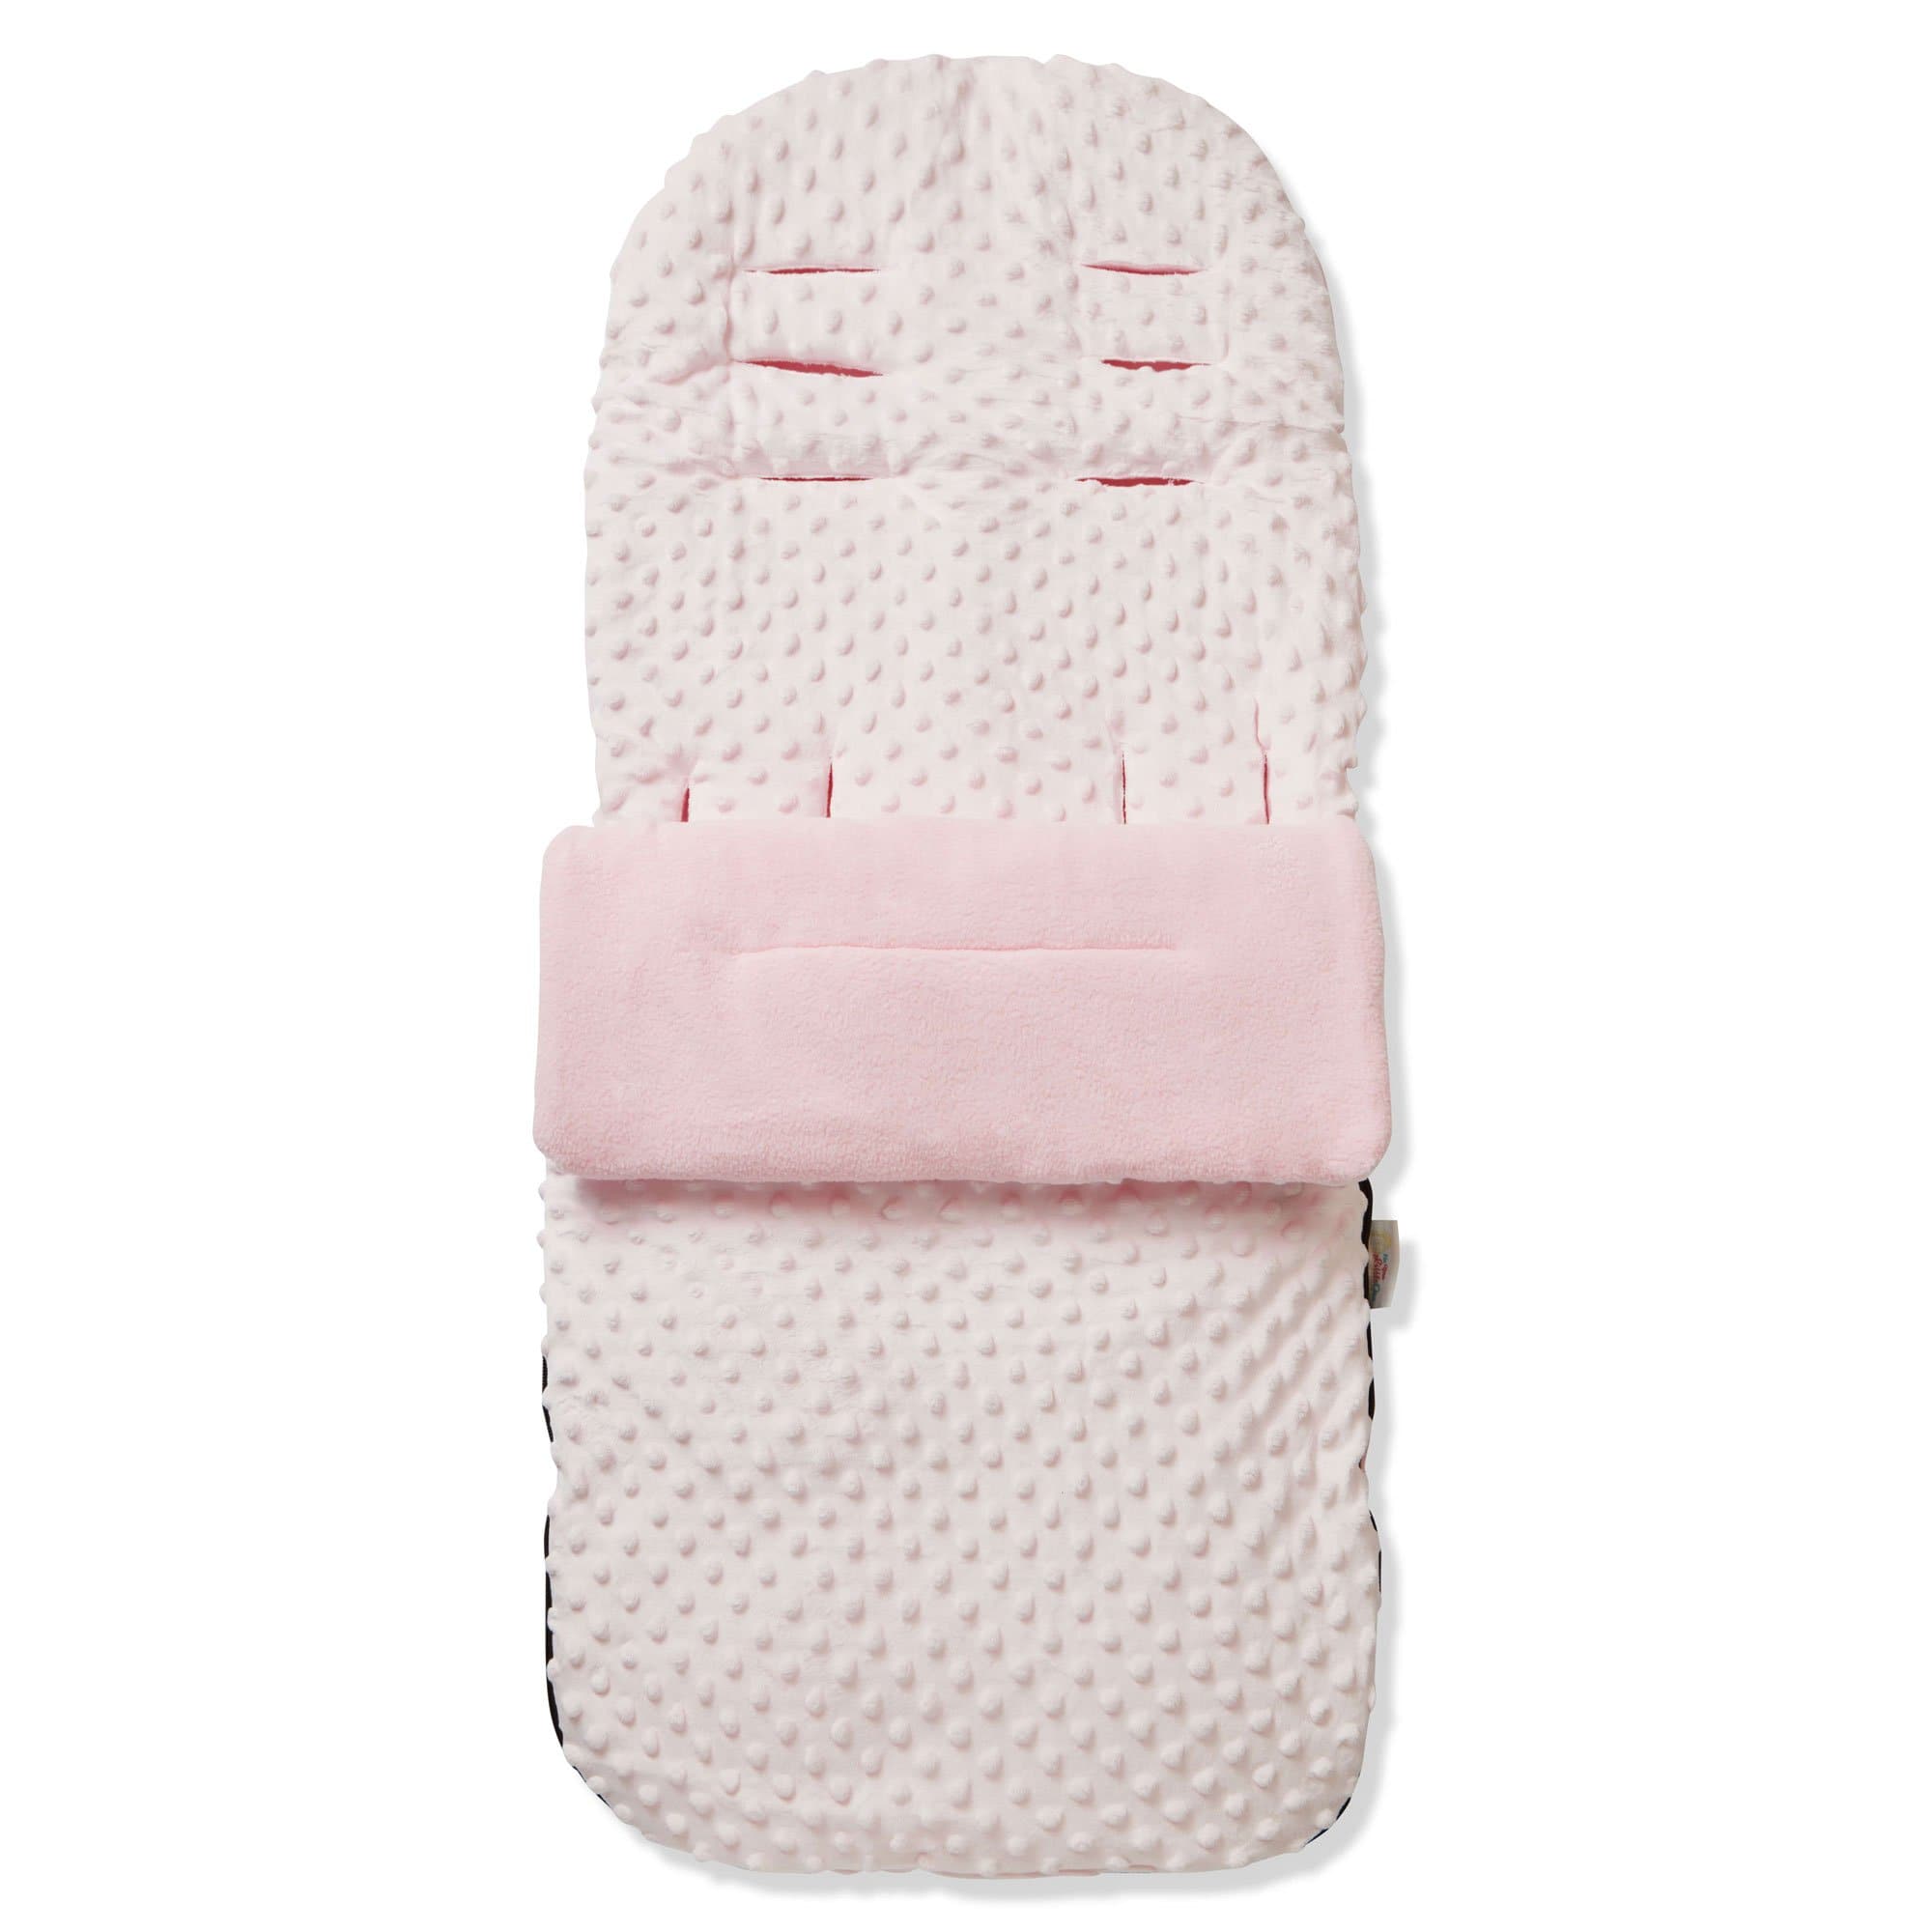 Dimple Footmuff / Cosy Toes Compatible with Peg Perego - Pink / Fits All Models | For Your Little One